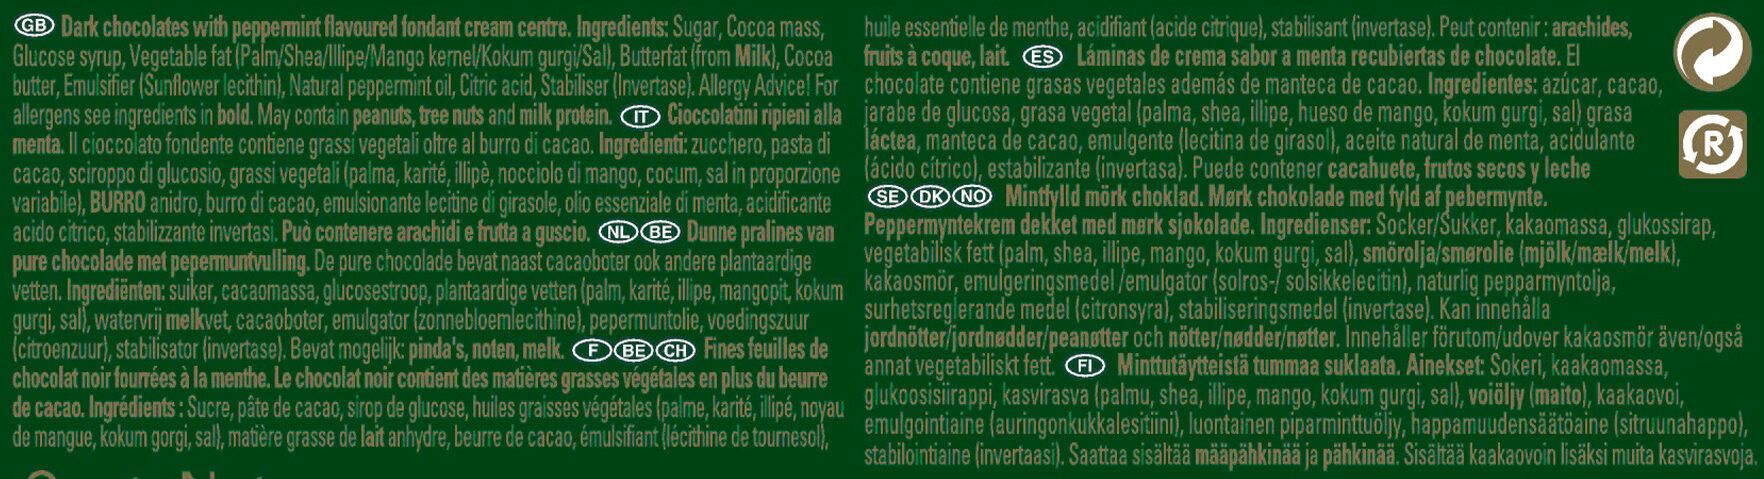 AFTER EIGHT Coffret 300g - Ingredients - fr